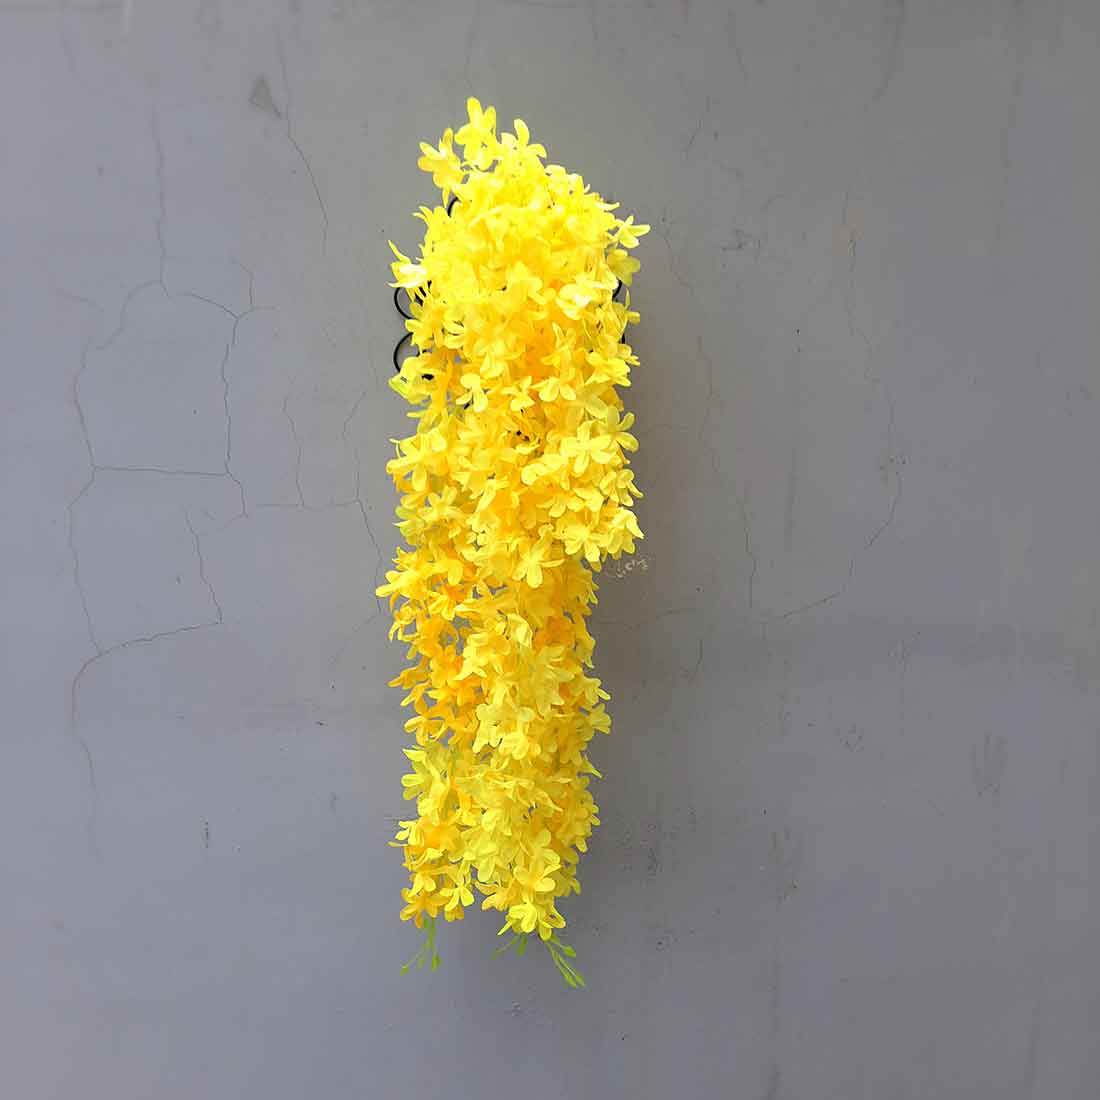 Artificial Flowers for Home Decoration - With Metal Stand - For Wall Hanging - ApkaMart